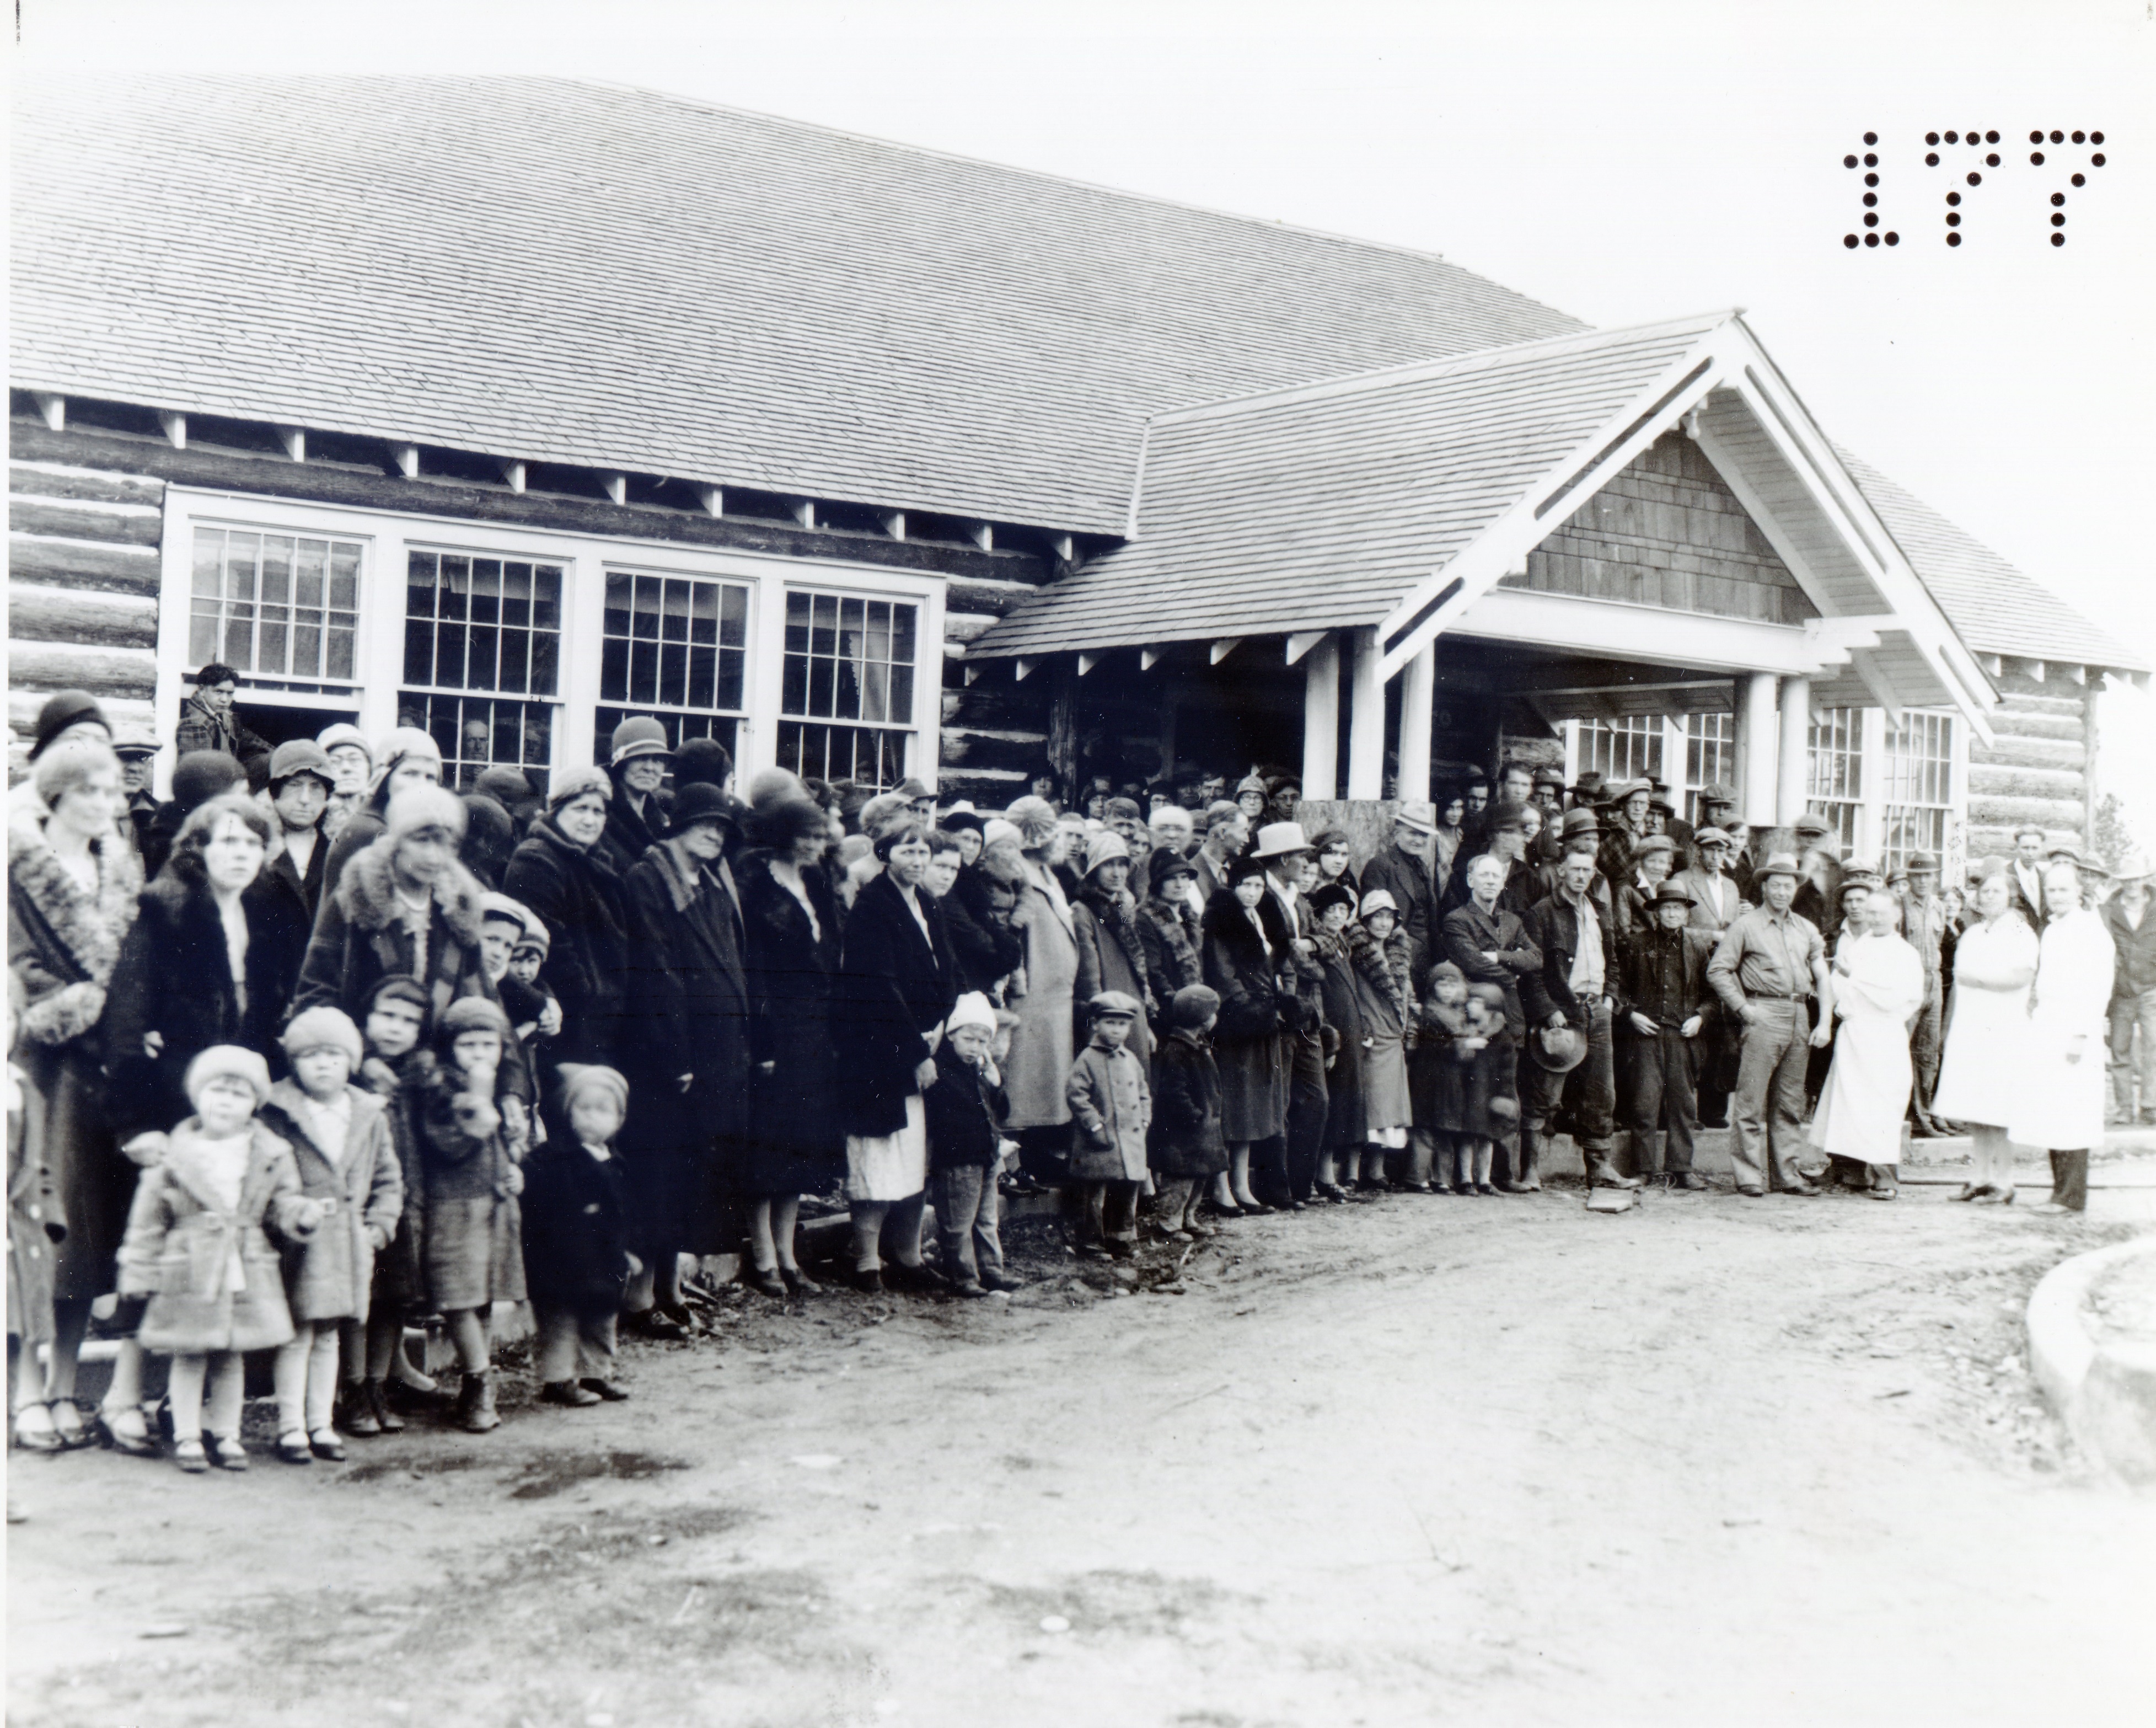 Families pose in front of a vaccination clinic in Darby, Montana